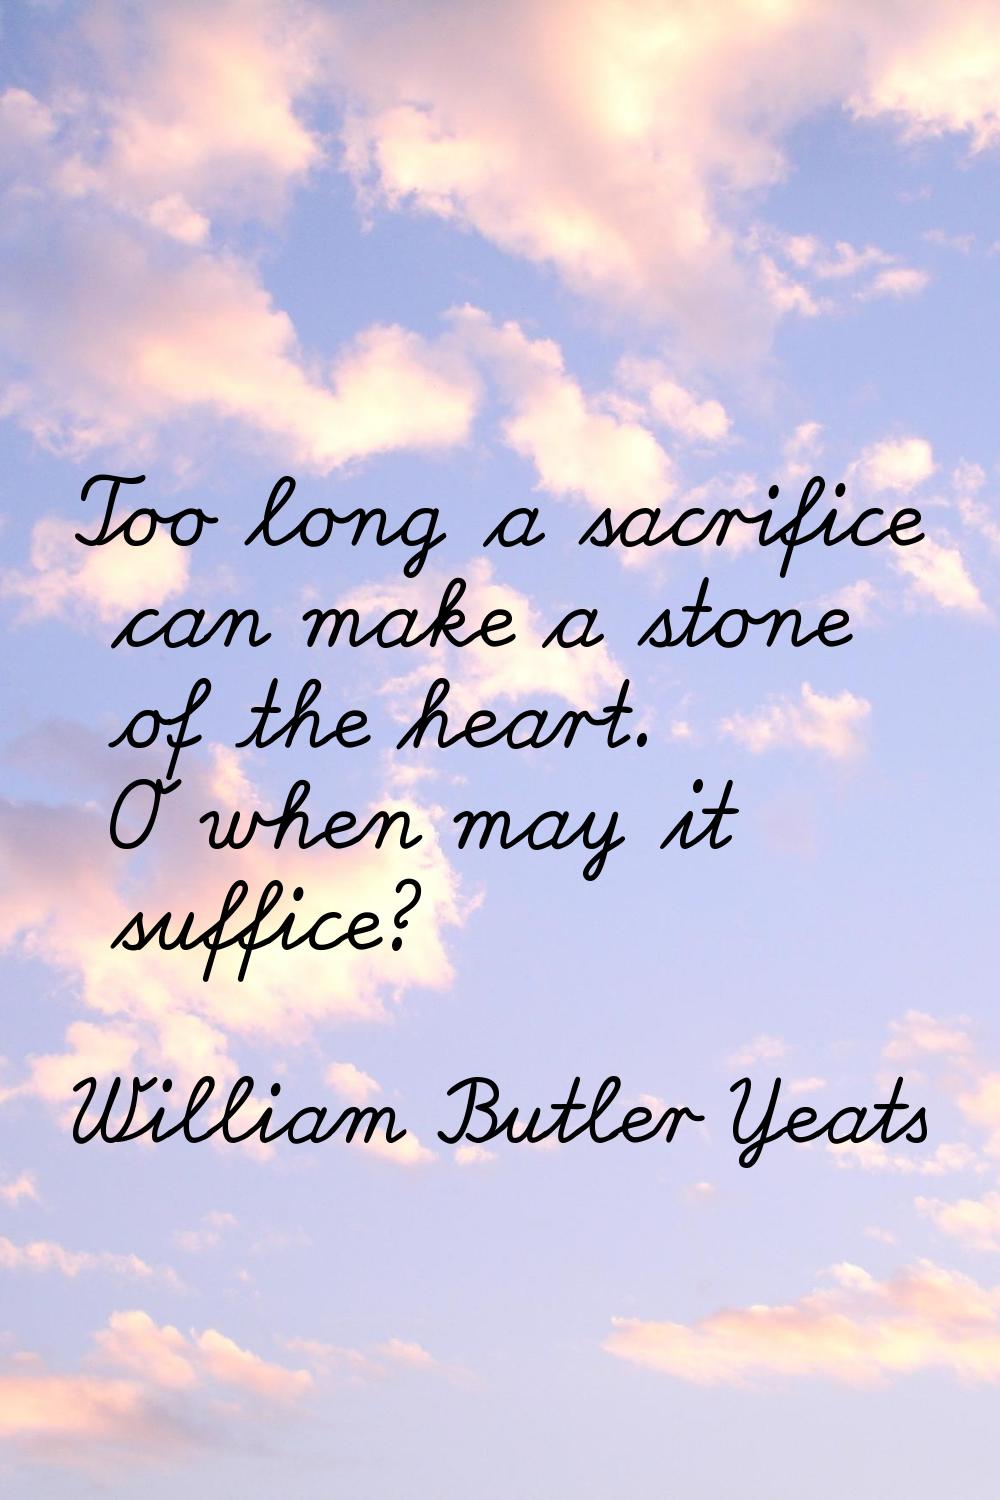 Too long a sacrifice can make a stone of the heart. O when may it suffice?